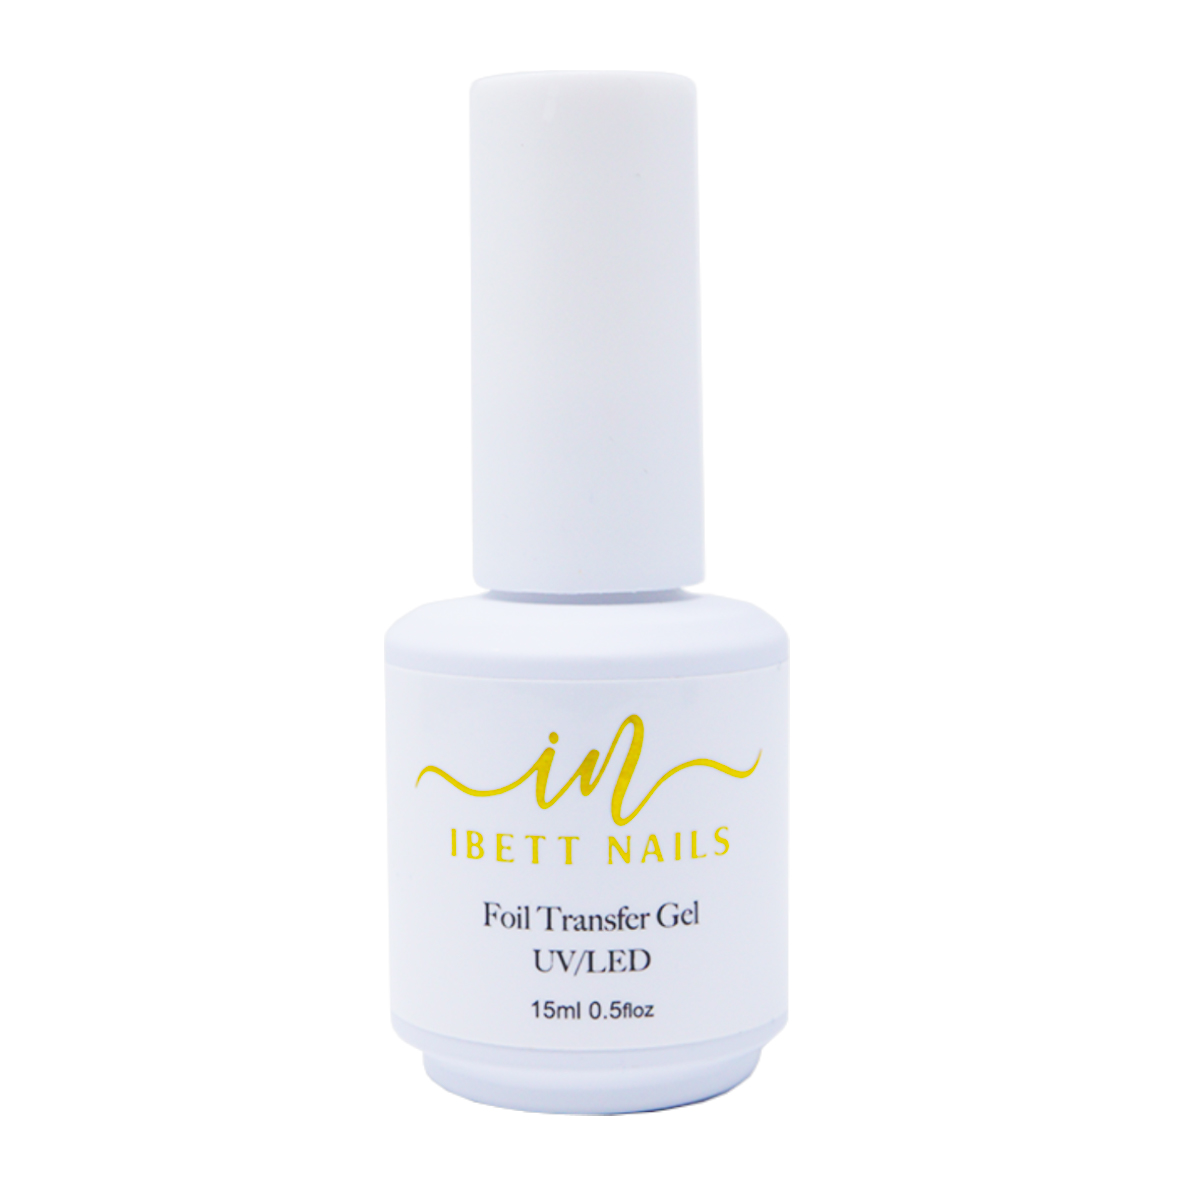 Ibett Nails - Foil Transfer Gel for Acrylic and UV Gels - Work with all ...